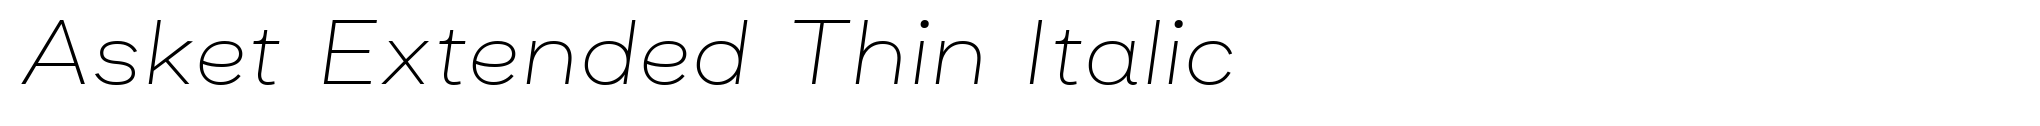 Asket Extended Thin Italic image